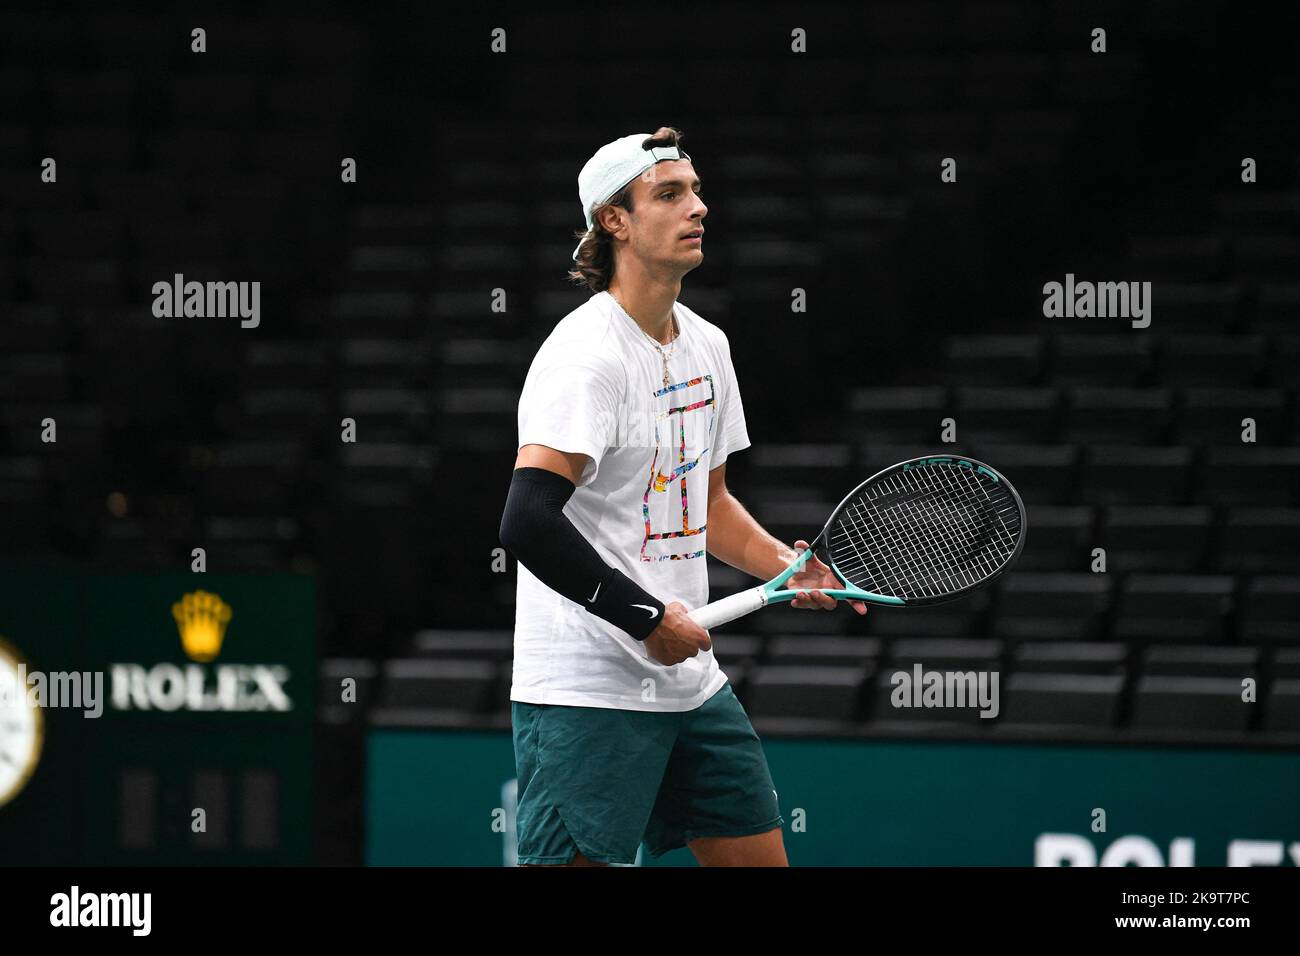 Lorenzo Musetti of Italy during the Rolex Paris Masters, ATP Masters 1000 tennis tournament, on October 29, 2022 at Accor Arena in Paris, France